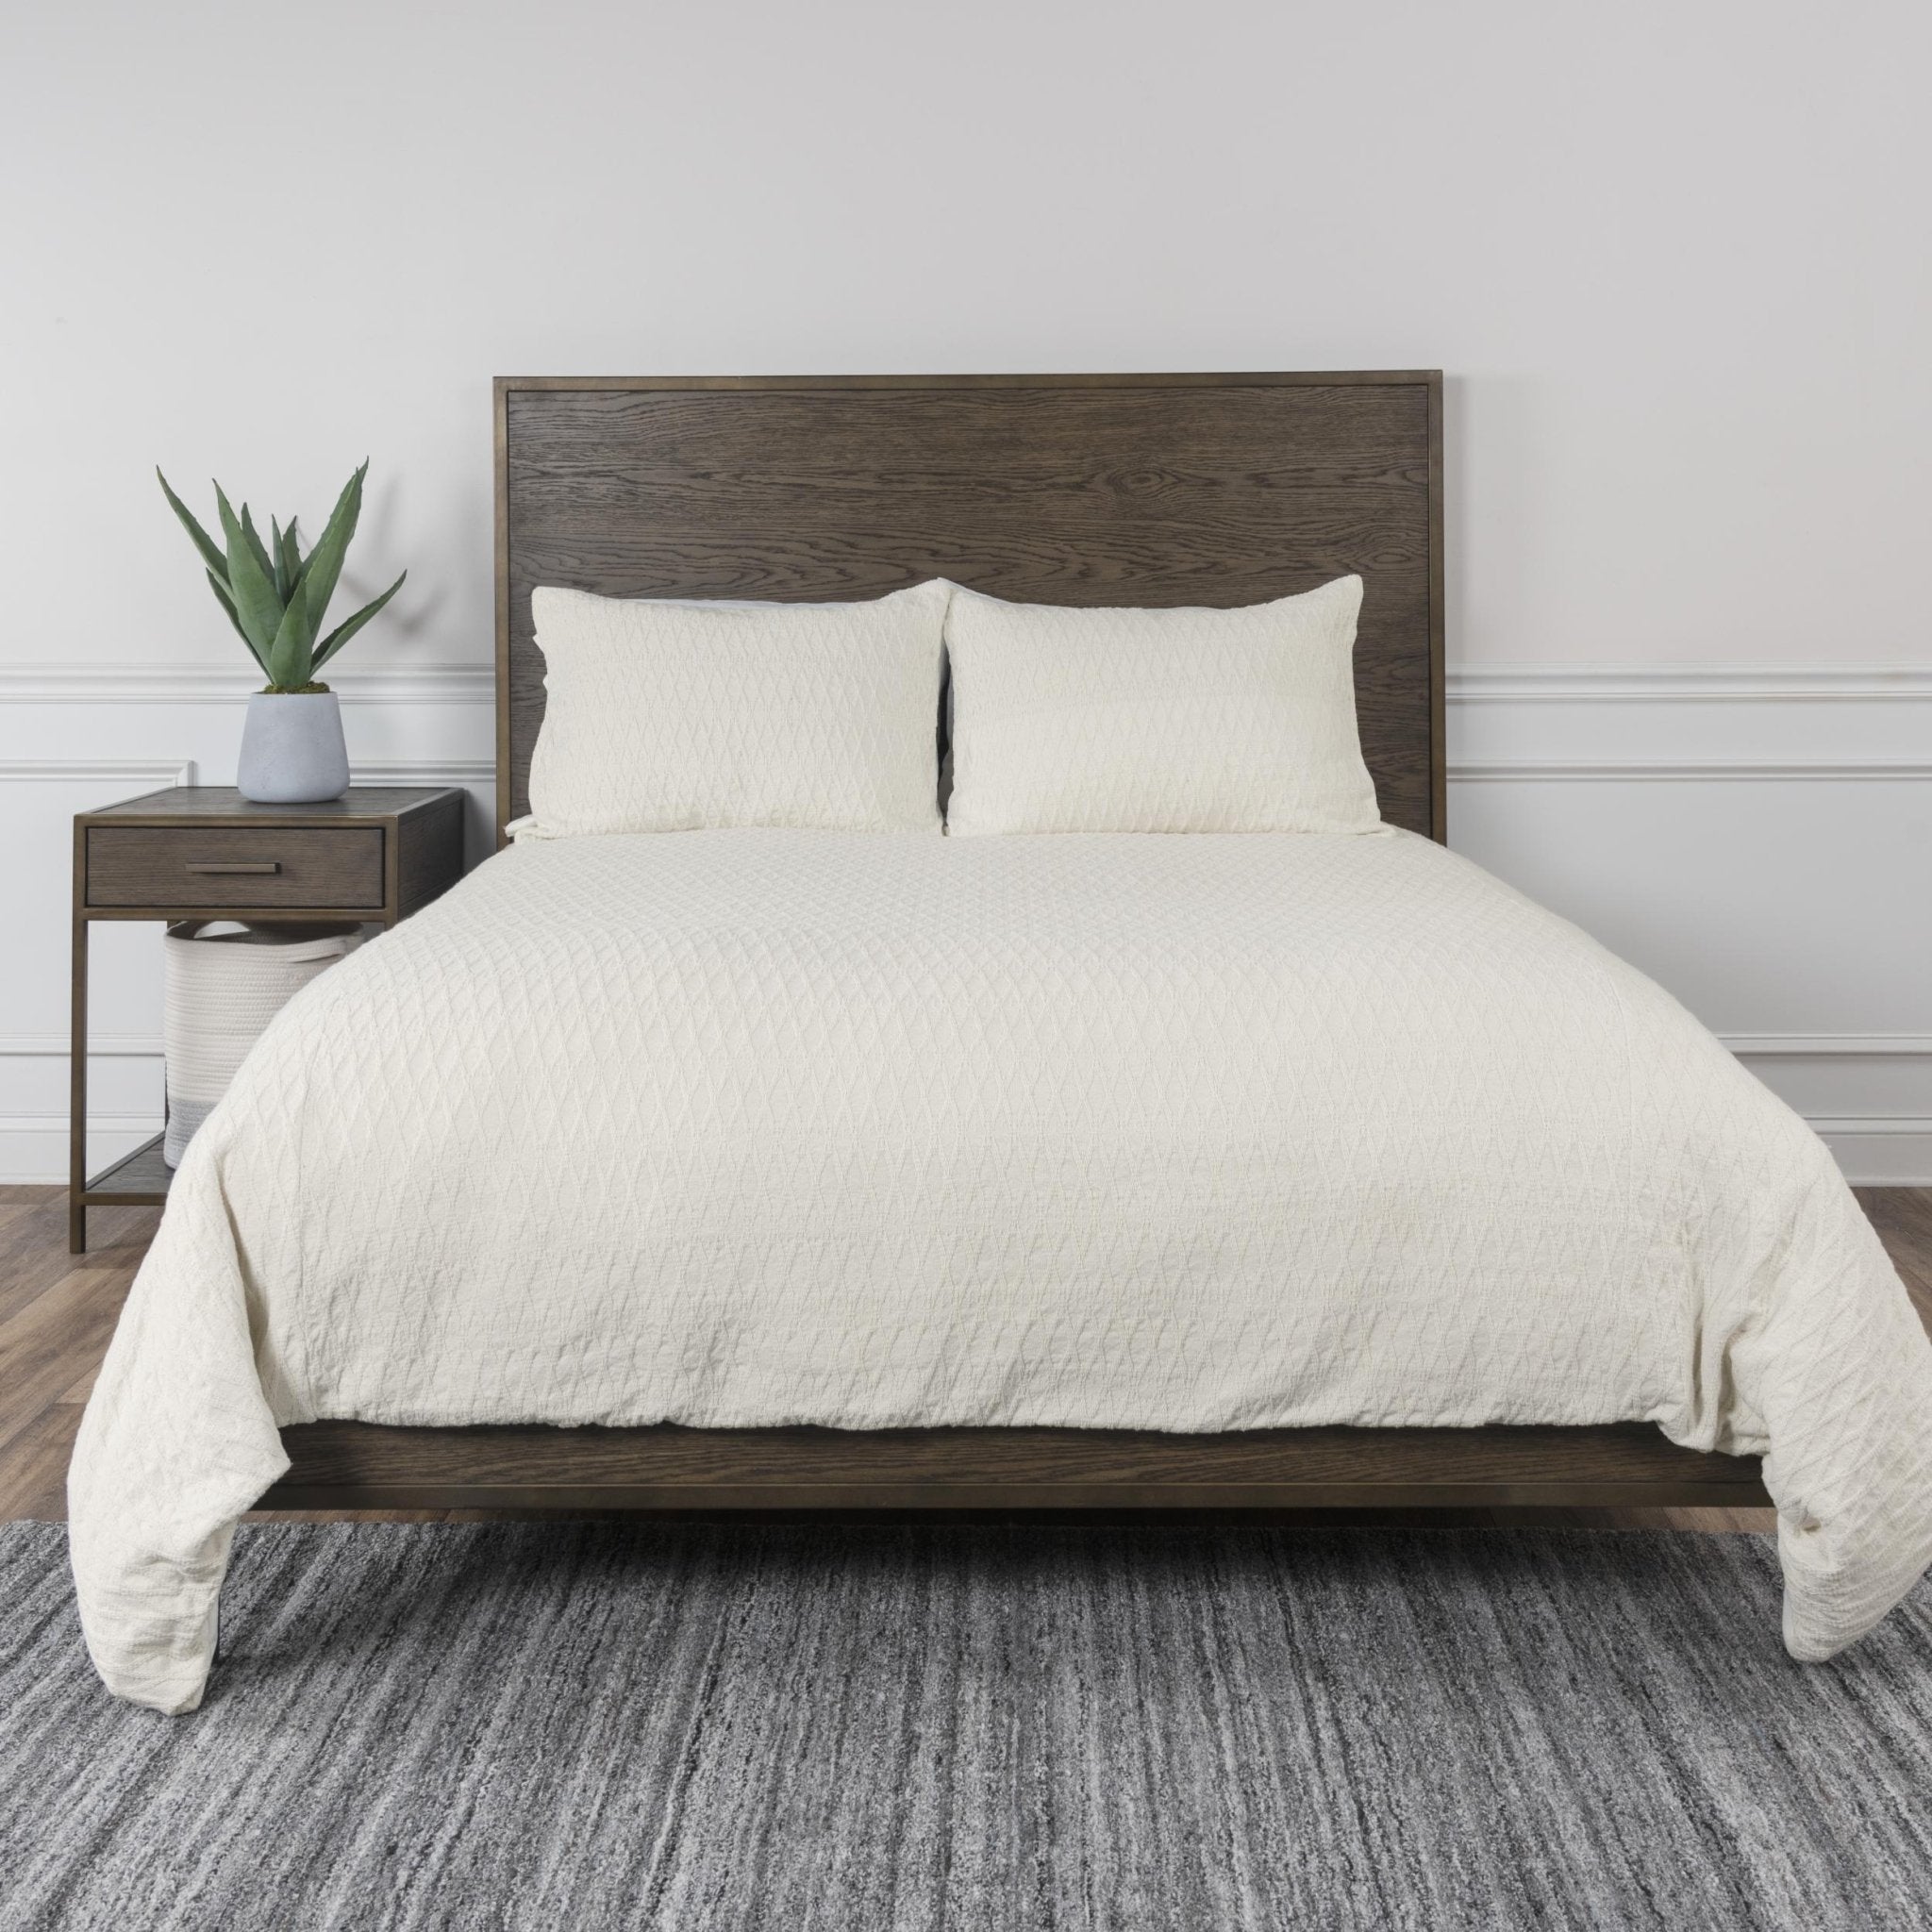 Woven Solid 100% Cotton Bedding - Bedding